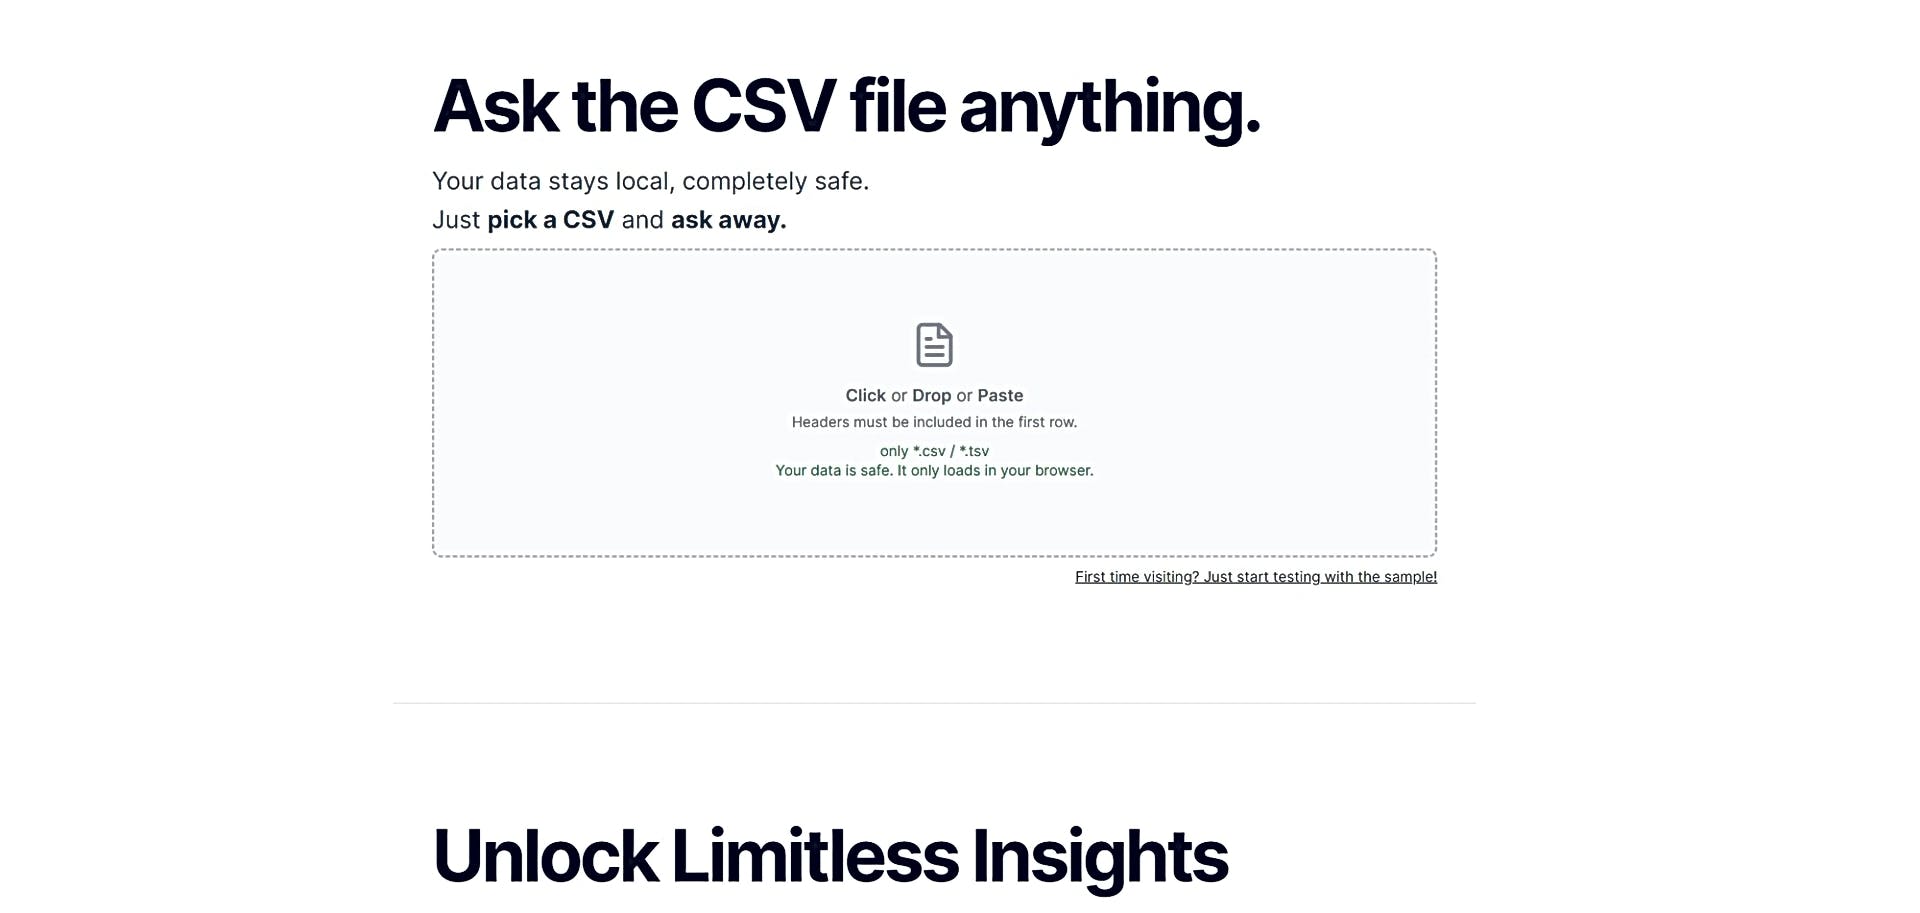 AskCSV featured